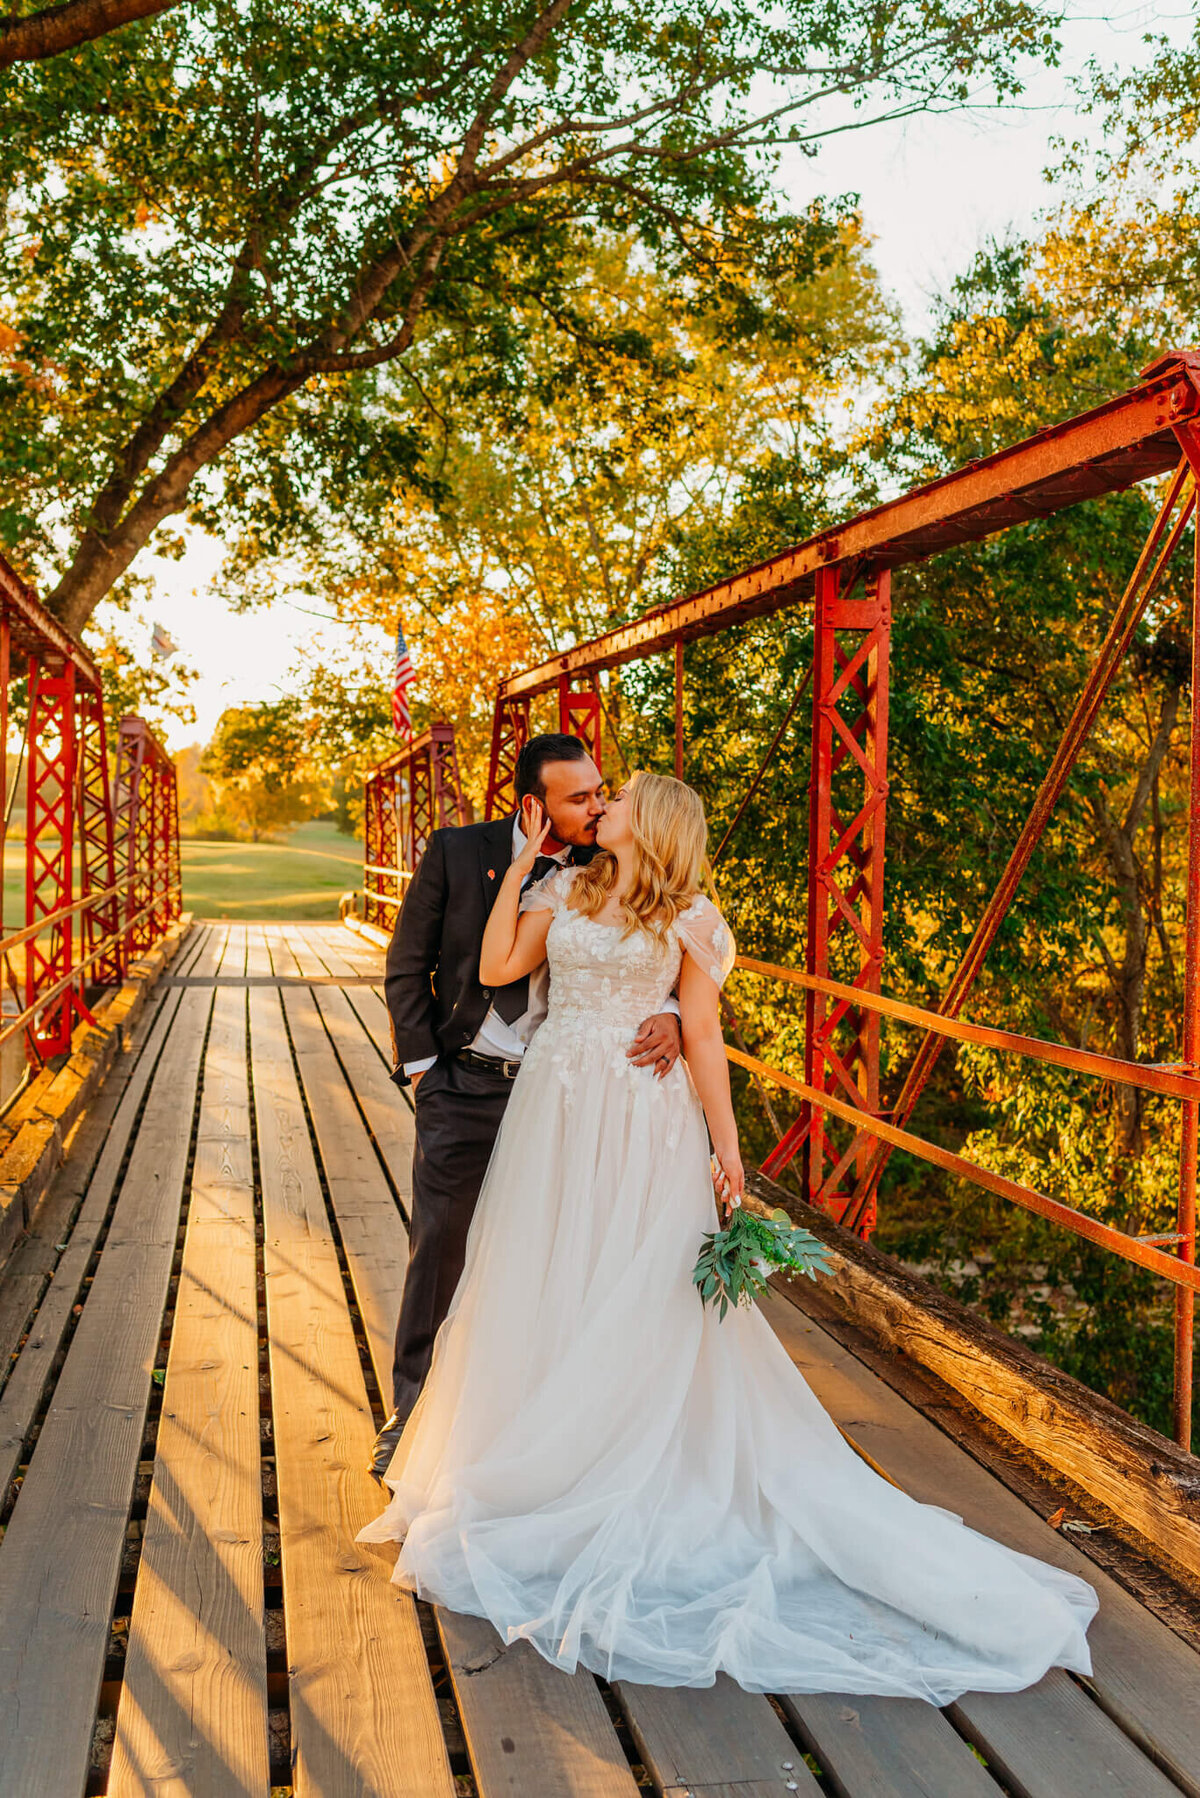 photo of a groom hugging the bride from behind while standing on a wooden bridge